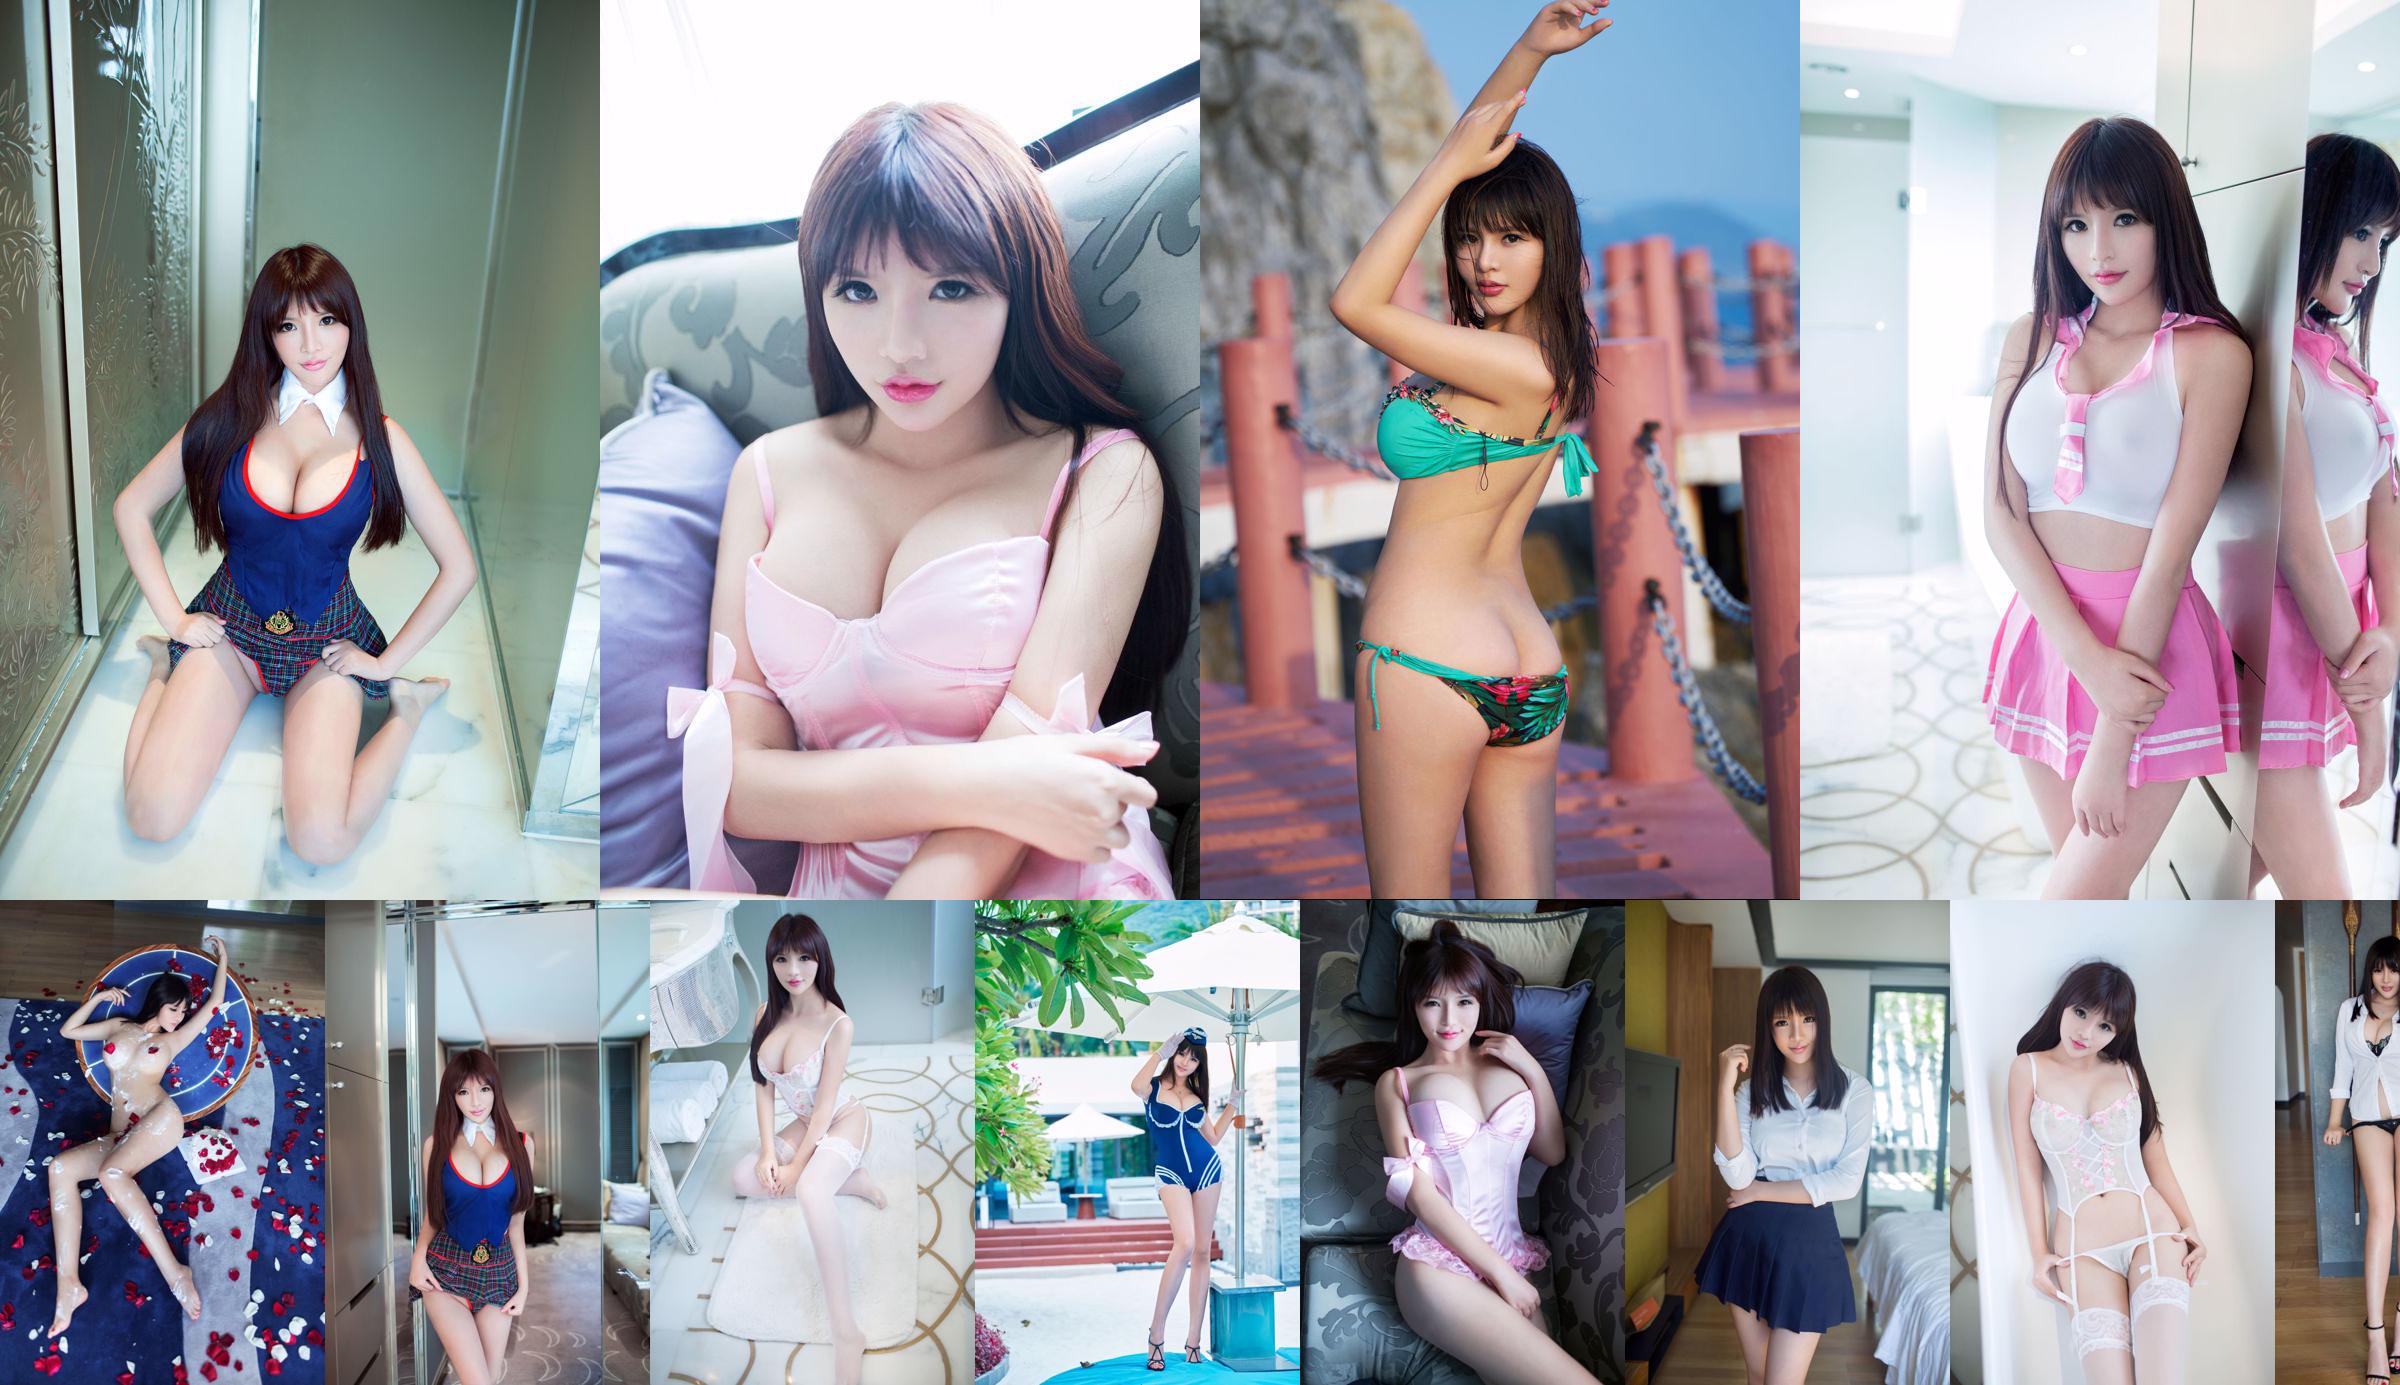 Wang Yimeng "Cute Face with Big Breasts, Tall and White" [Push Girl TuiGirl] No.063 No.d5f8ed Page 1